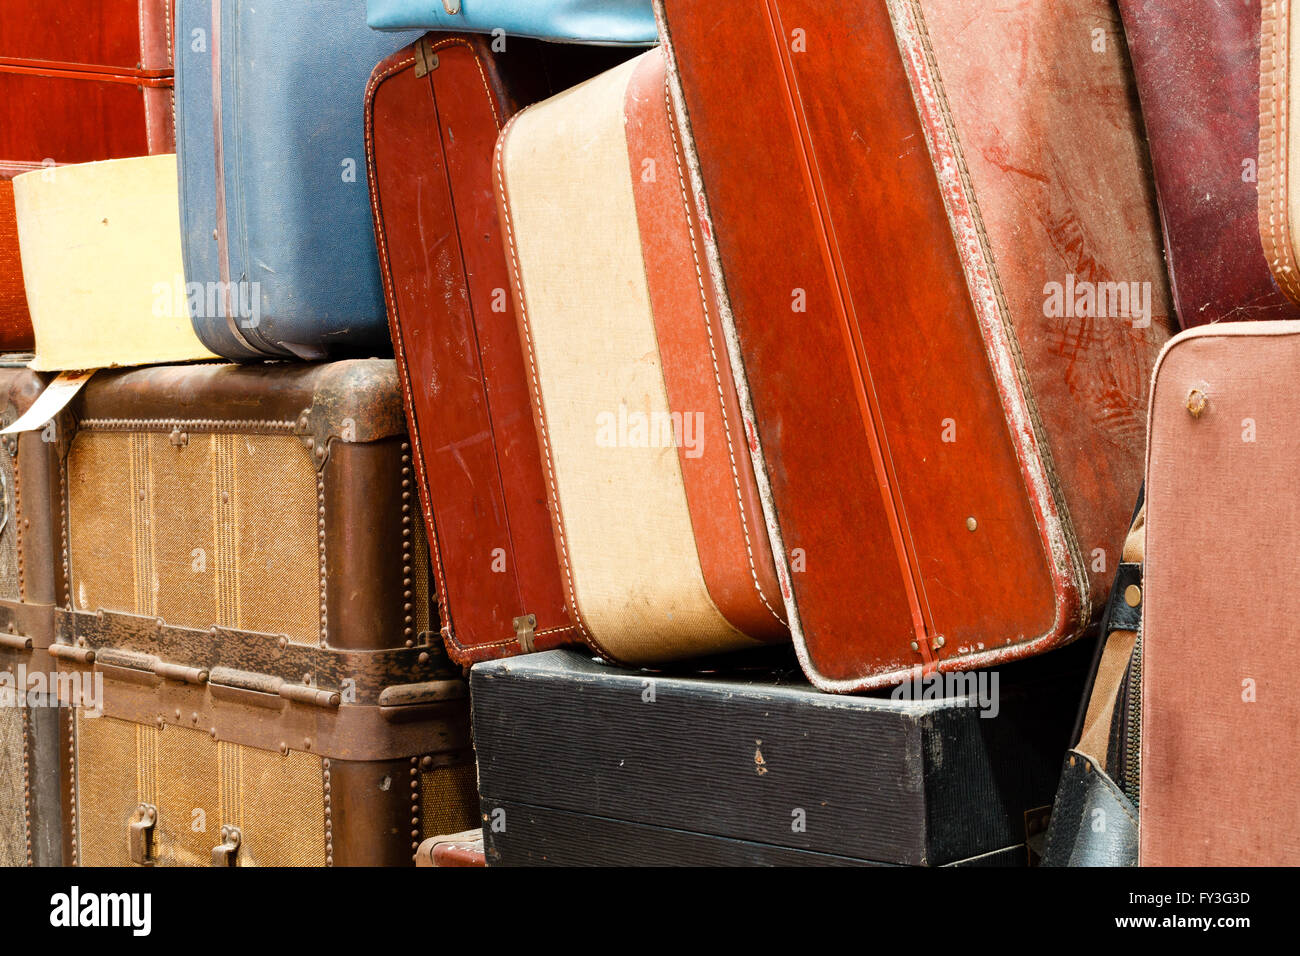 Collection of old luggage and baggage on display at the train museum. Southeastern Railway Museum Stock Photo